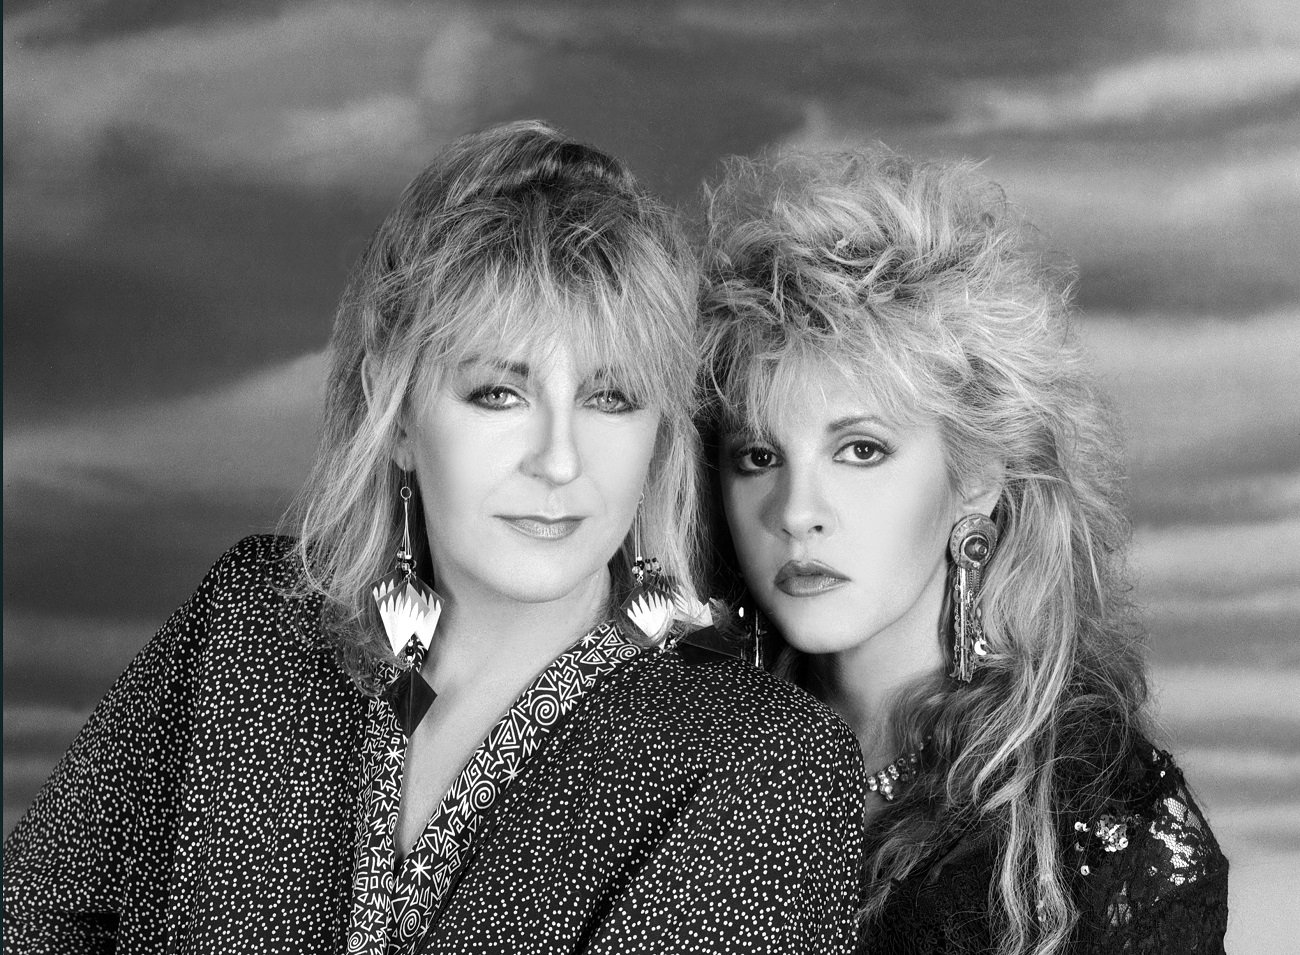 A black and white picture of Stevie Nicks standing slightly behind Christine McVie.